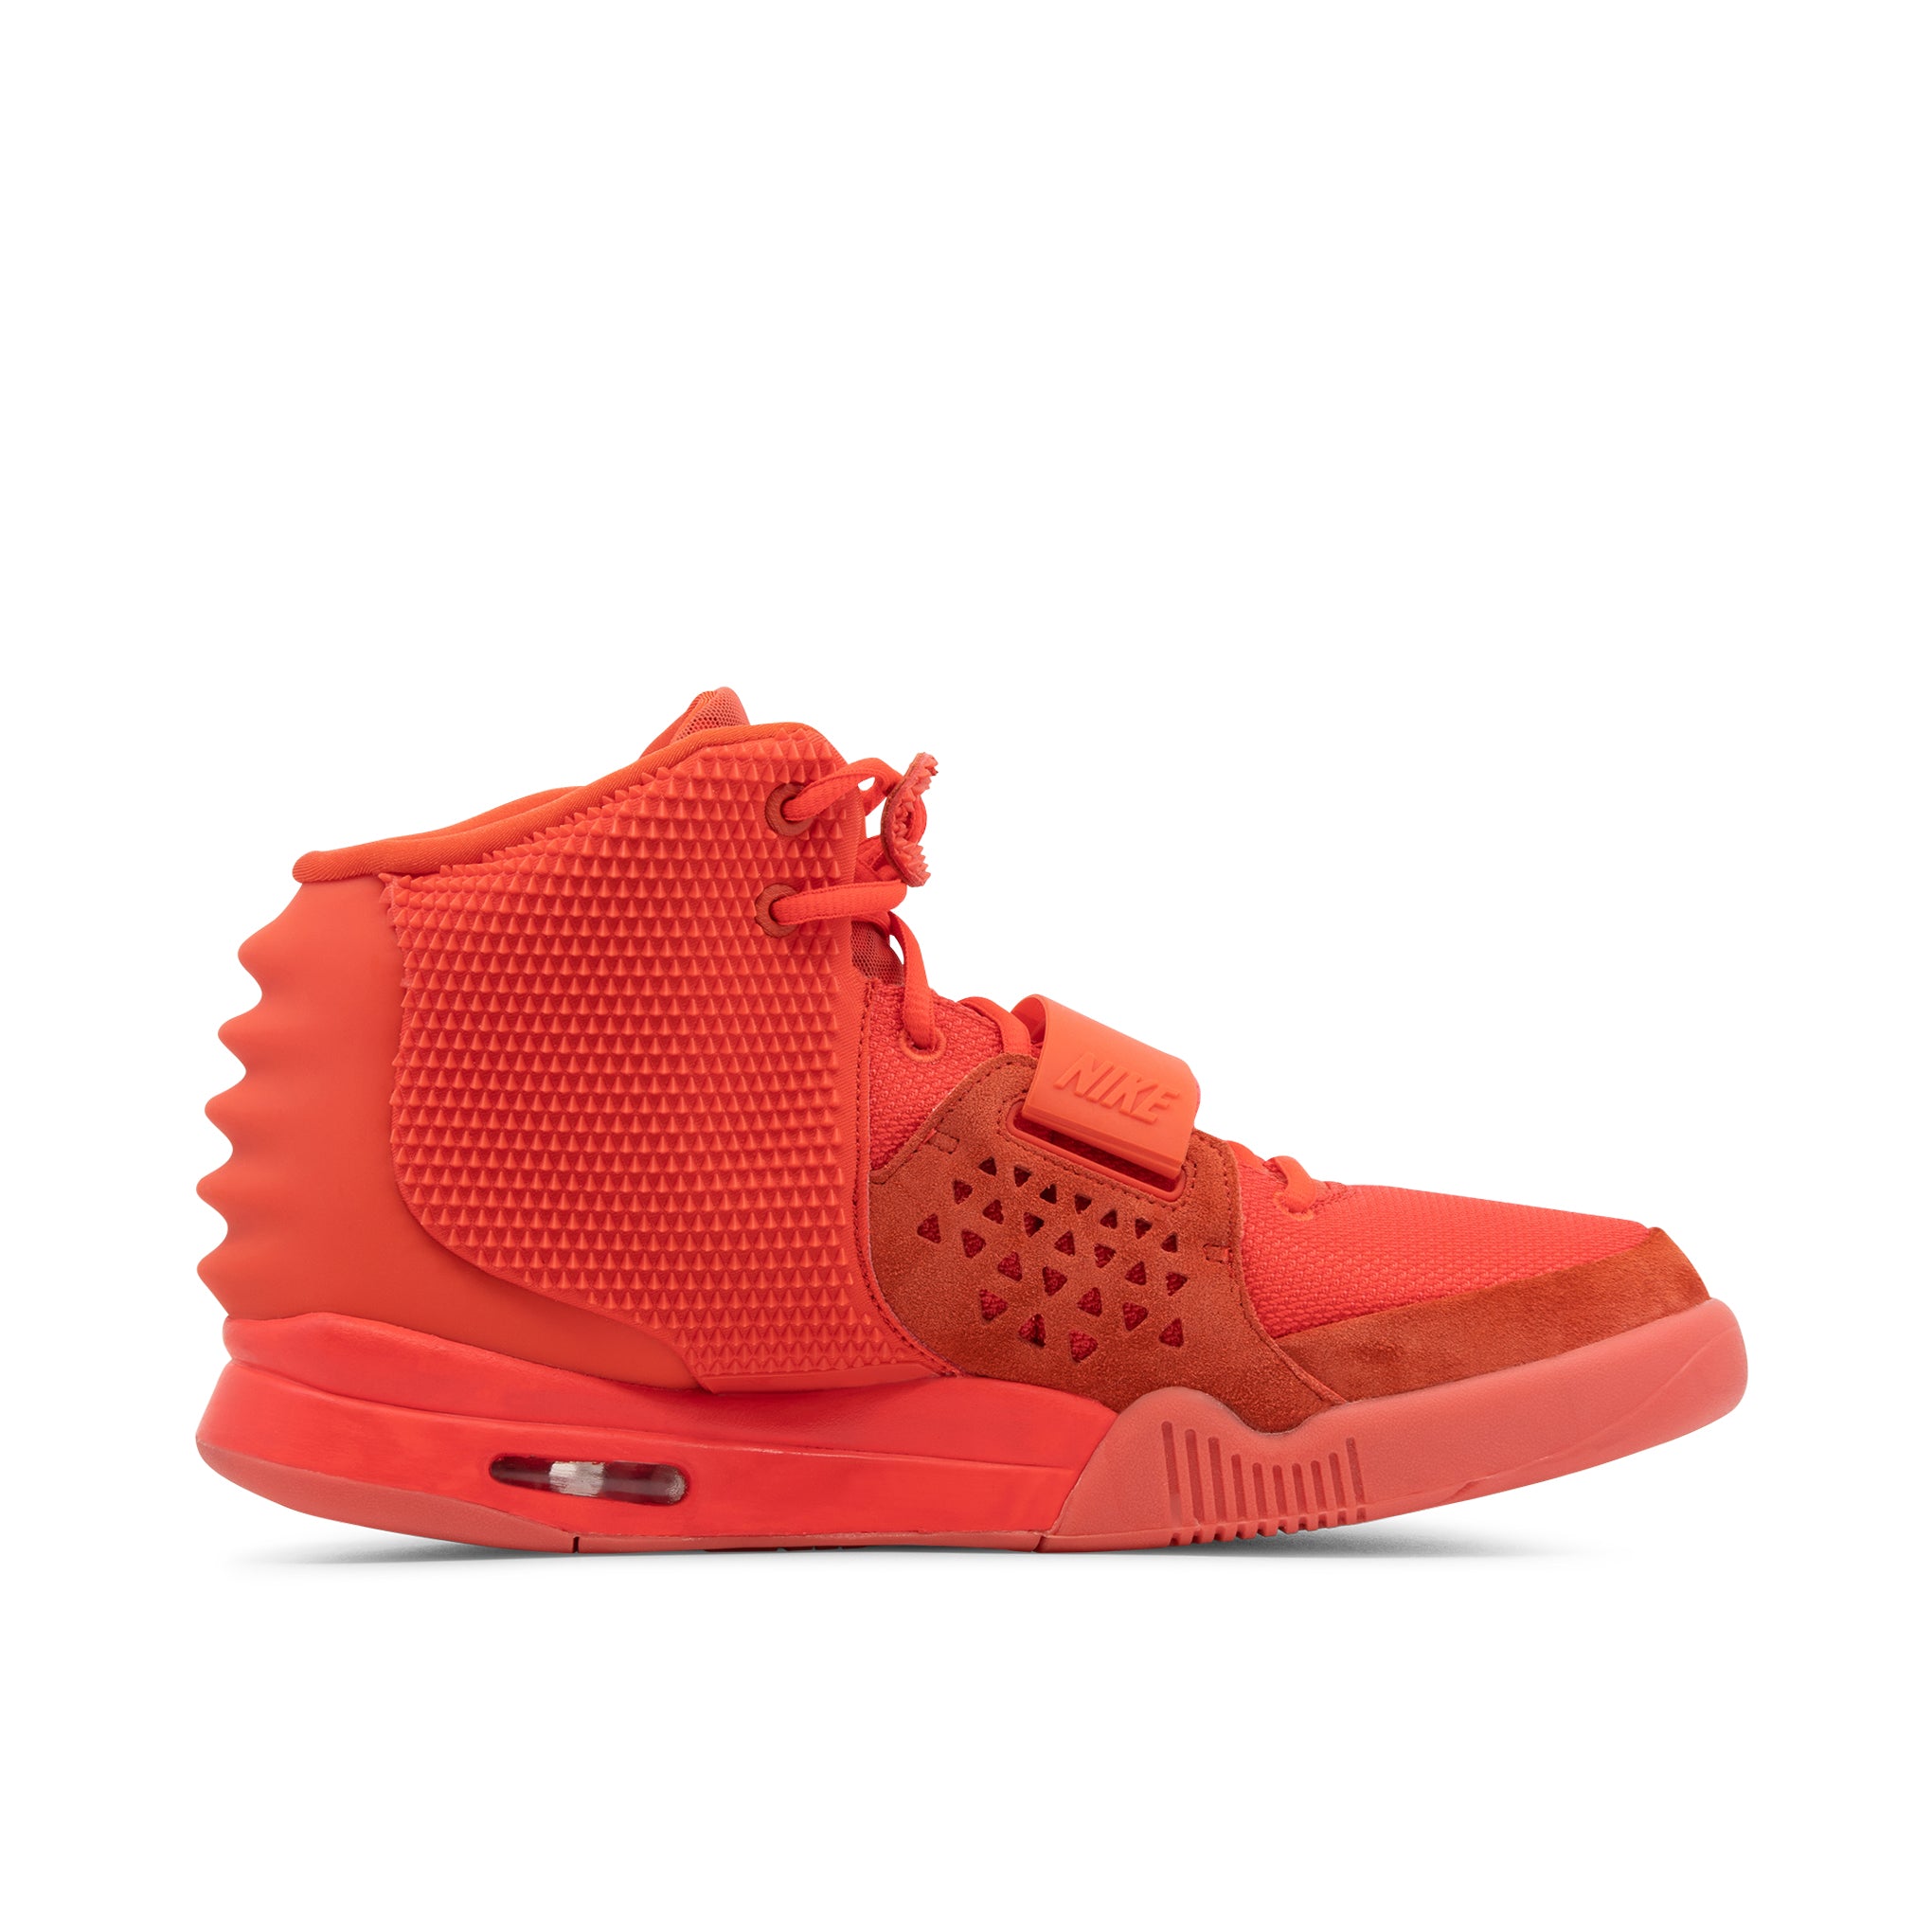 NIKE AIR YEEZY 2 RED OCTOBER